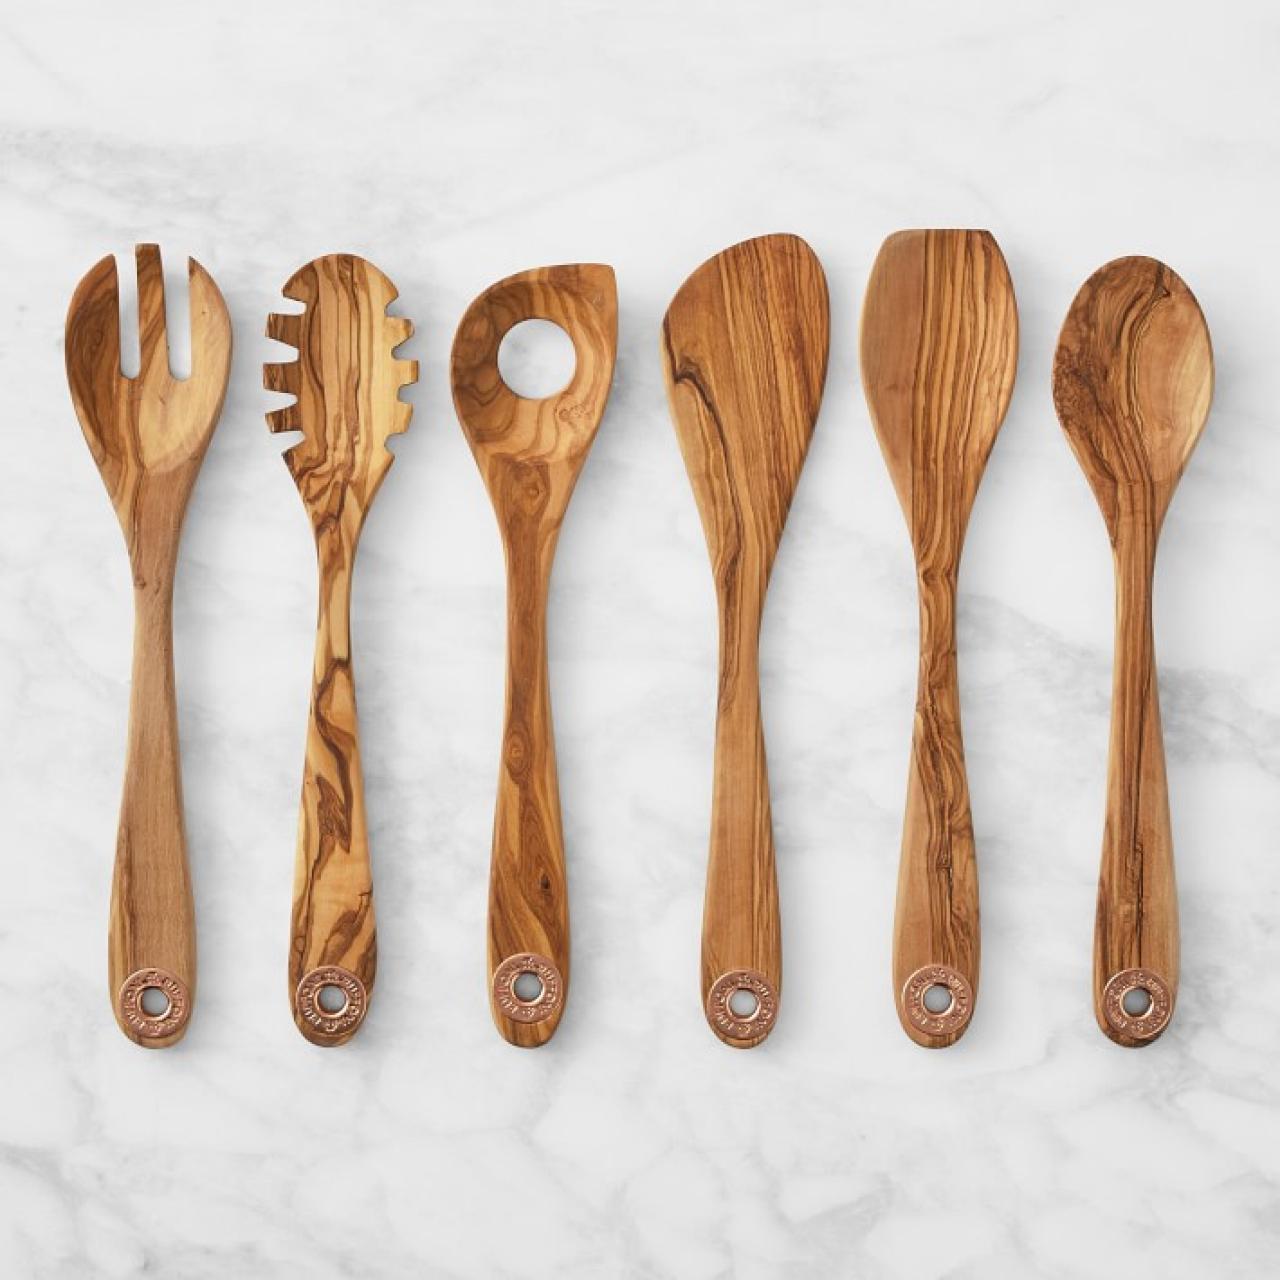 How to Choose the Best Set of Kitchen Tools in 2020